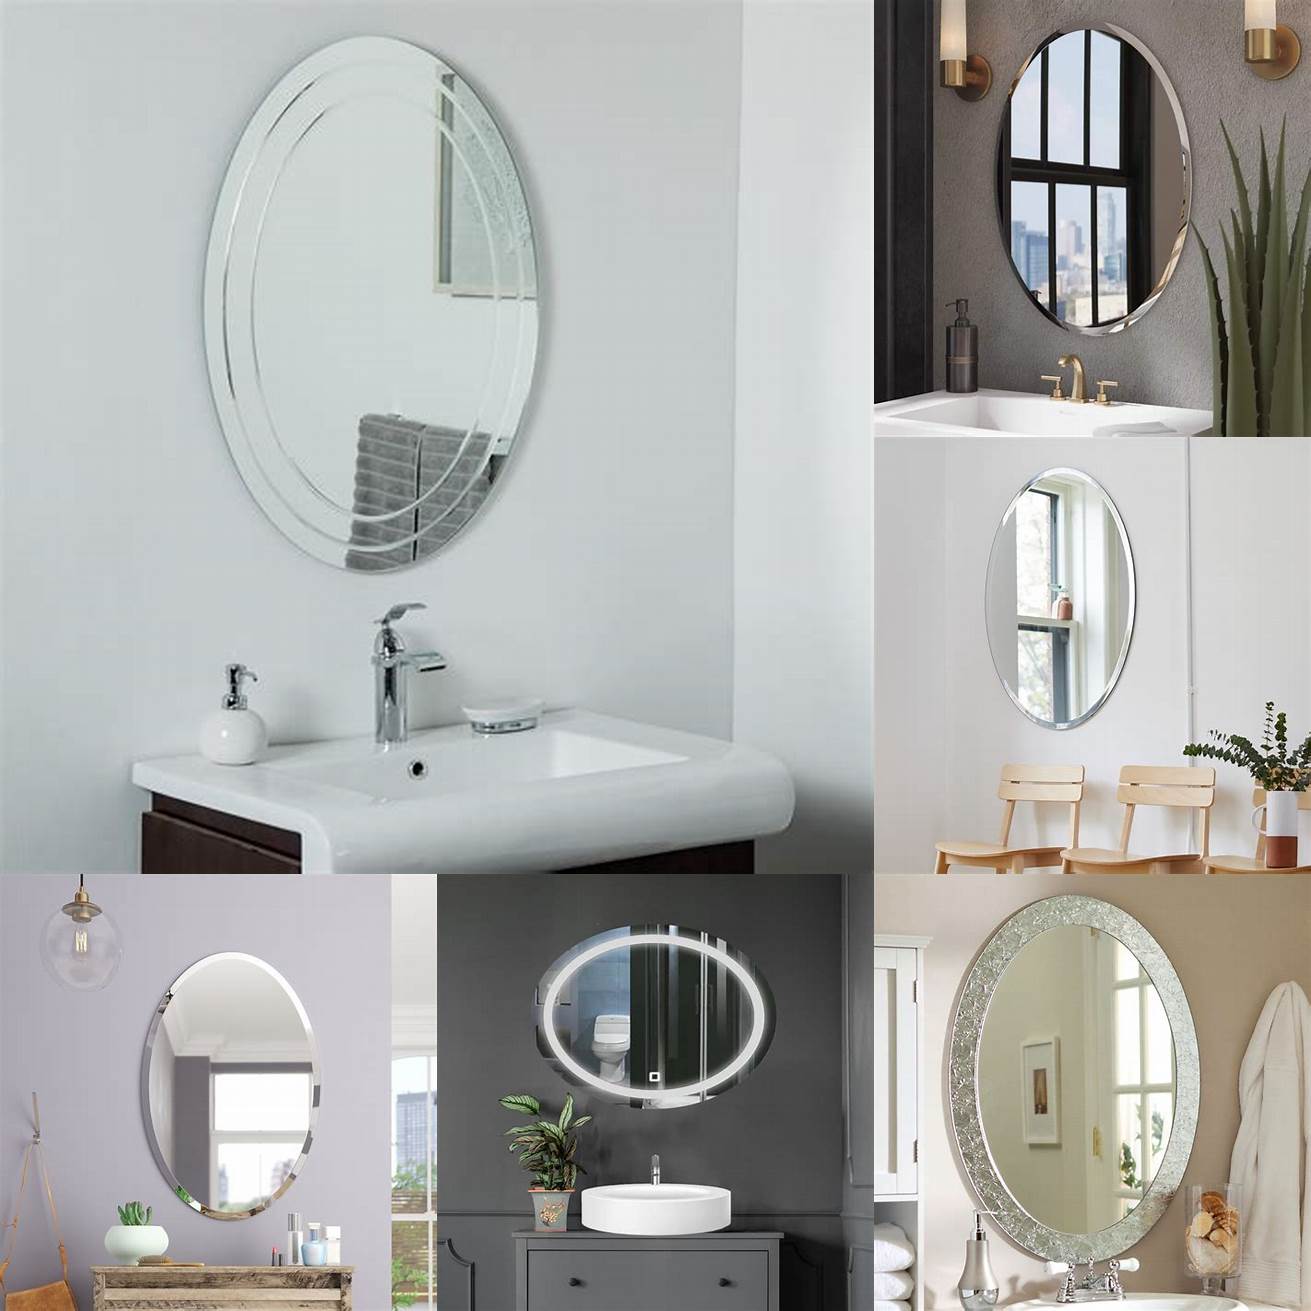 A frameless oval mirror with adhesive installation